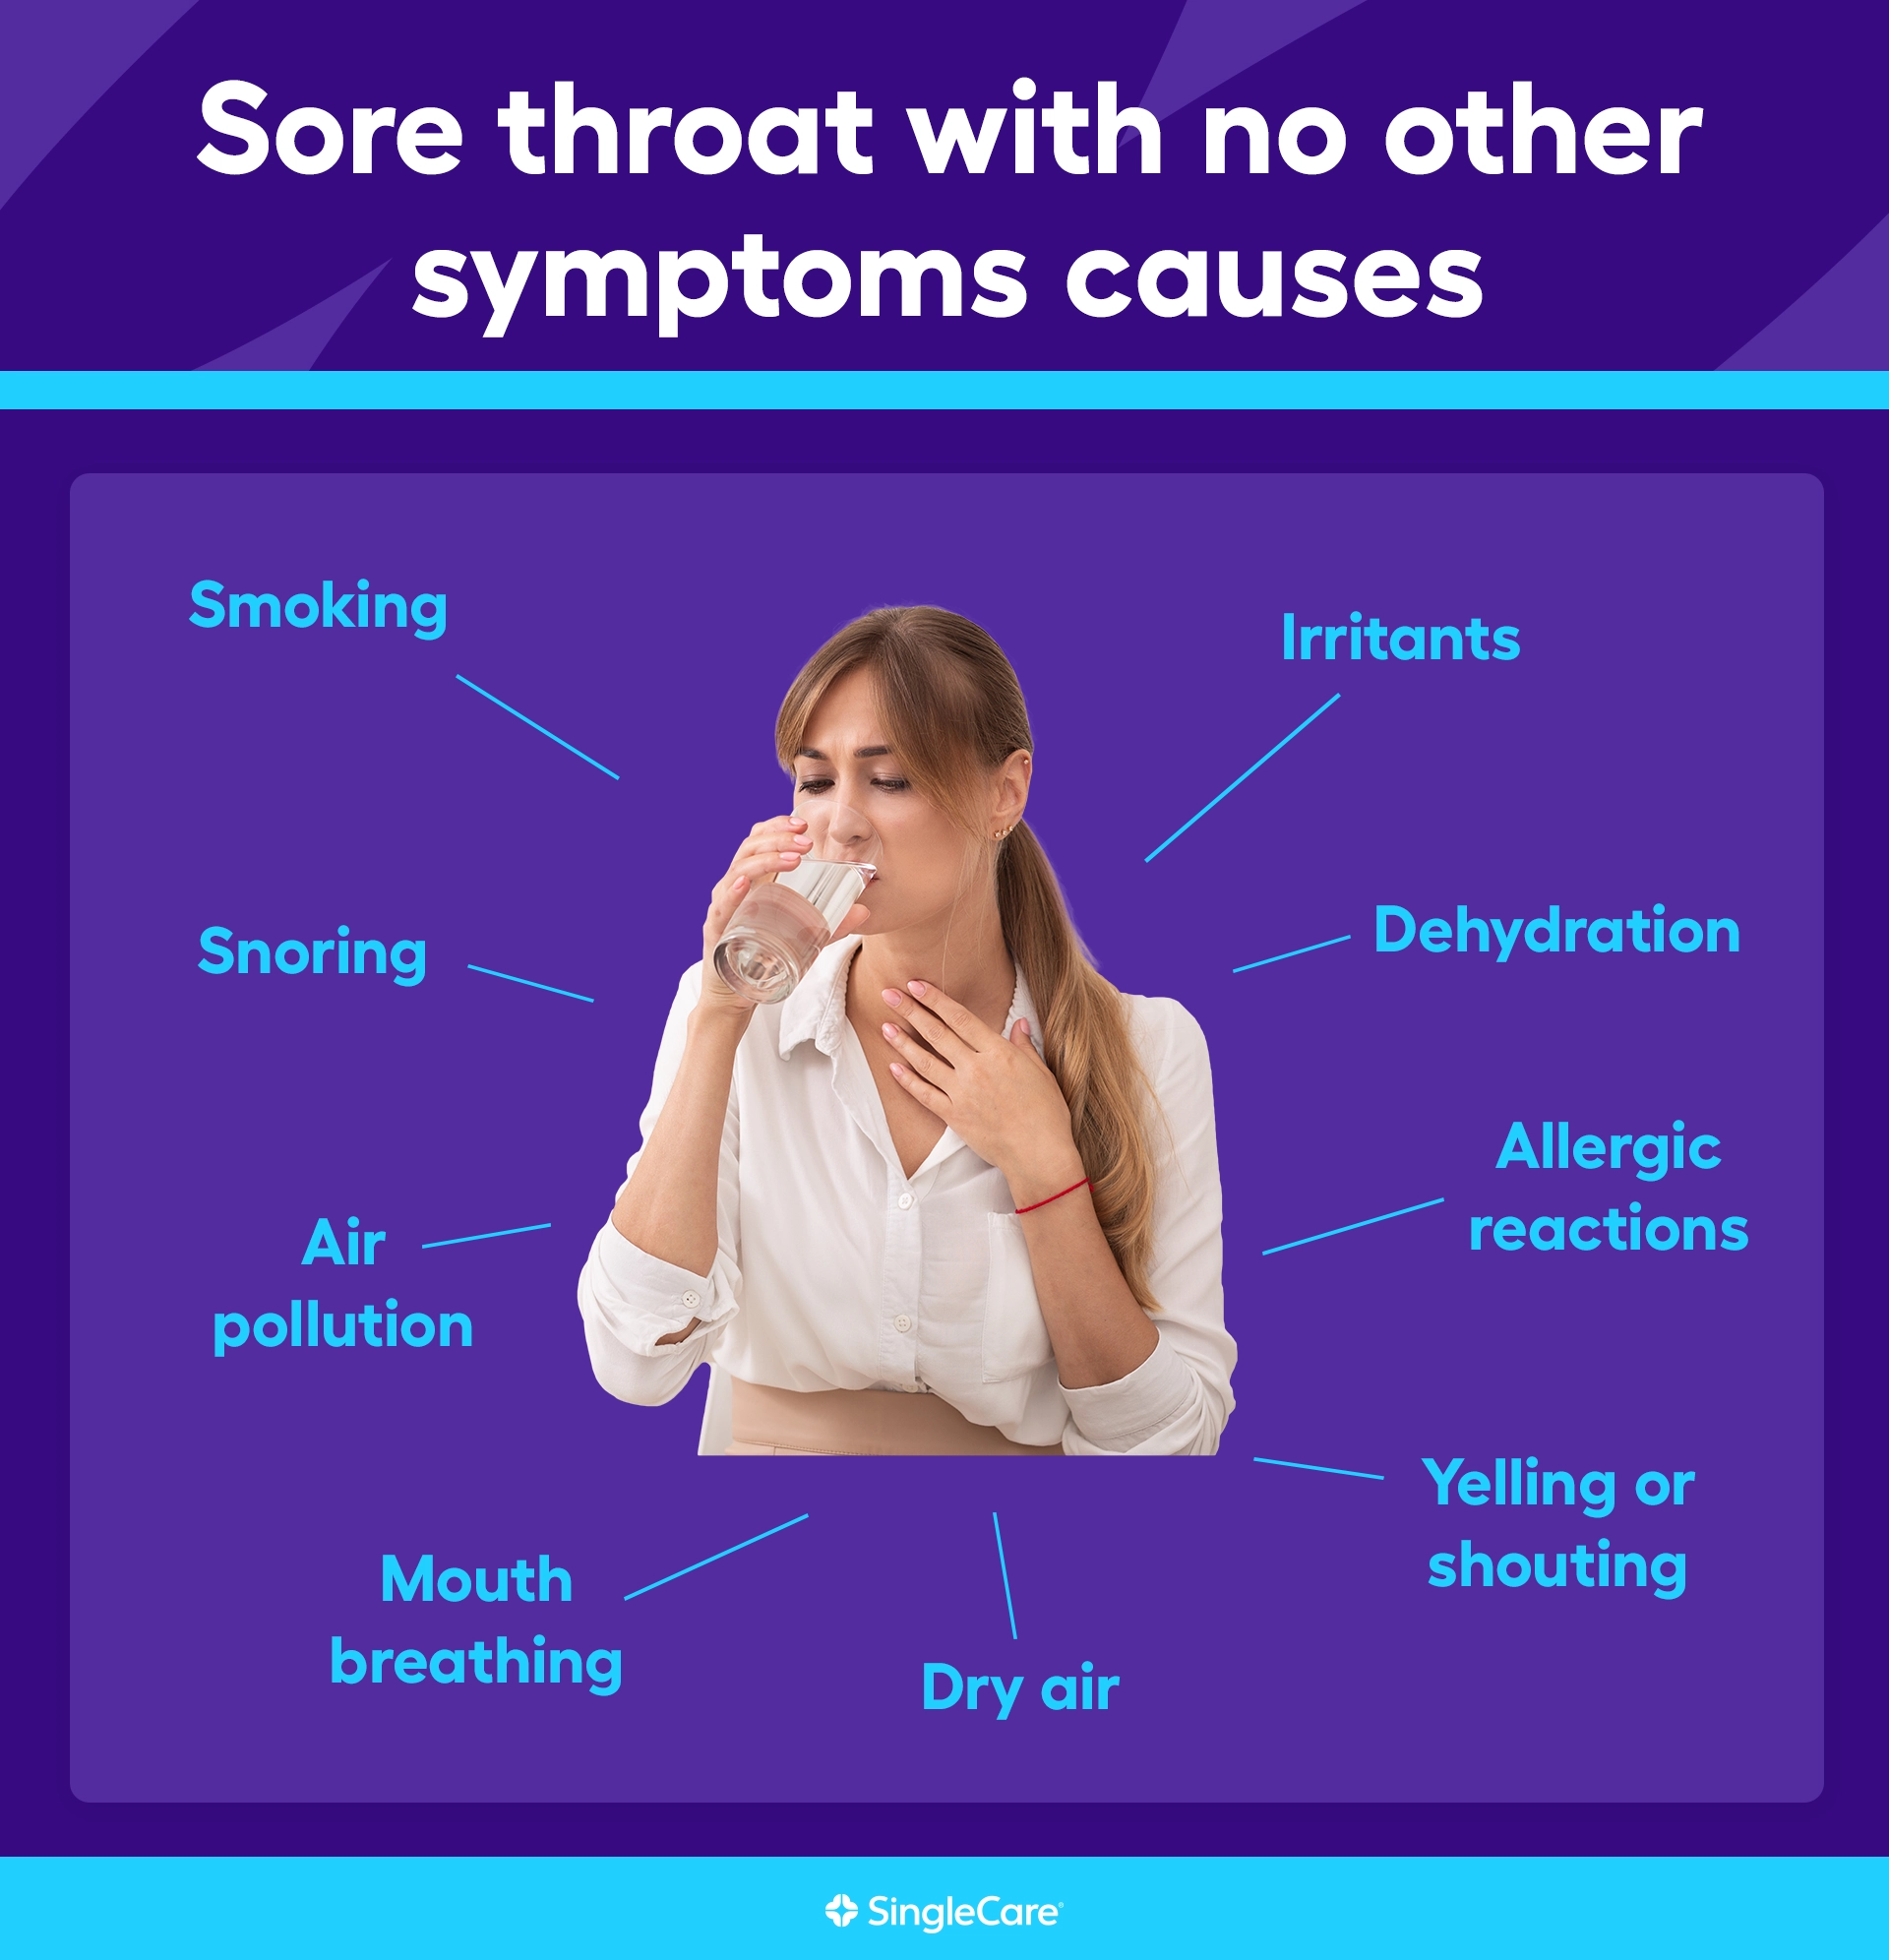 What causes sore throat with no other symptoms?